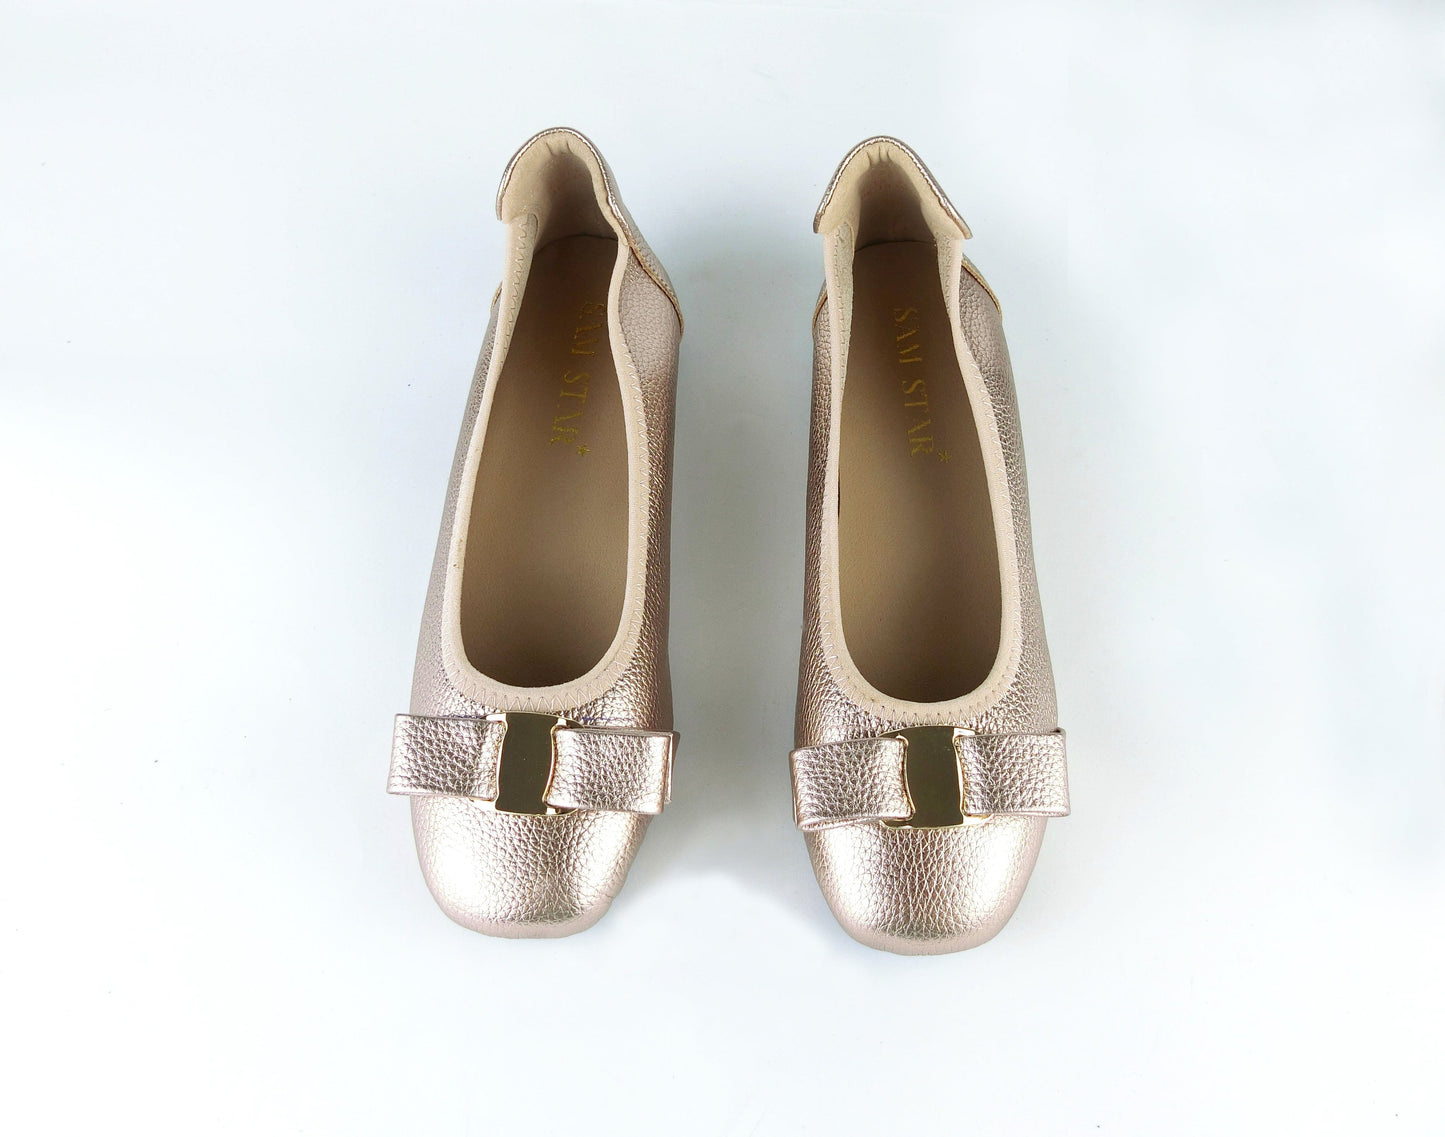 163-13 Leather pumps with gold buckle ( SALE ) Pumps Sam Star shoes Rosegold 36/3 